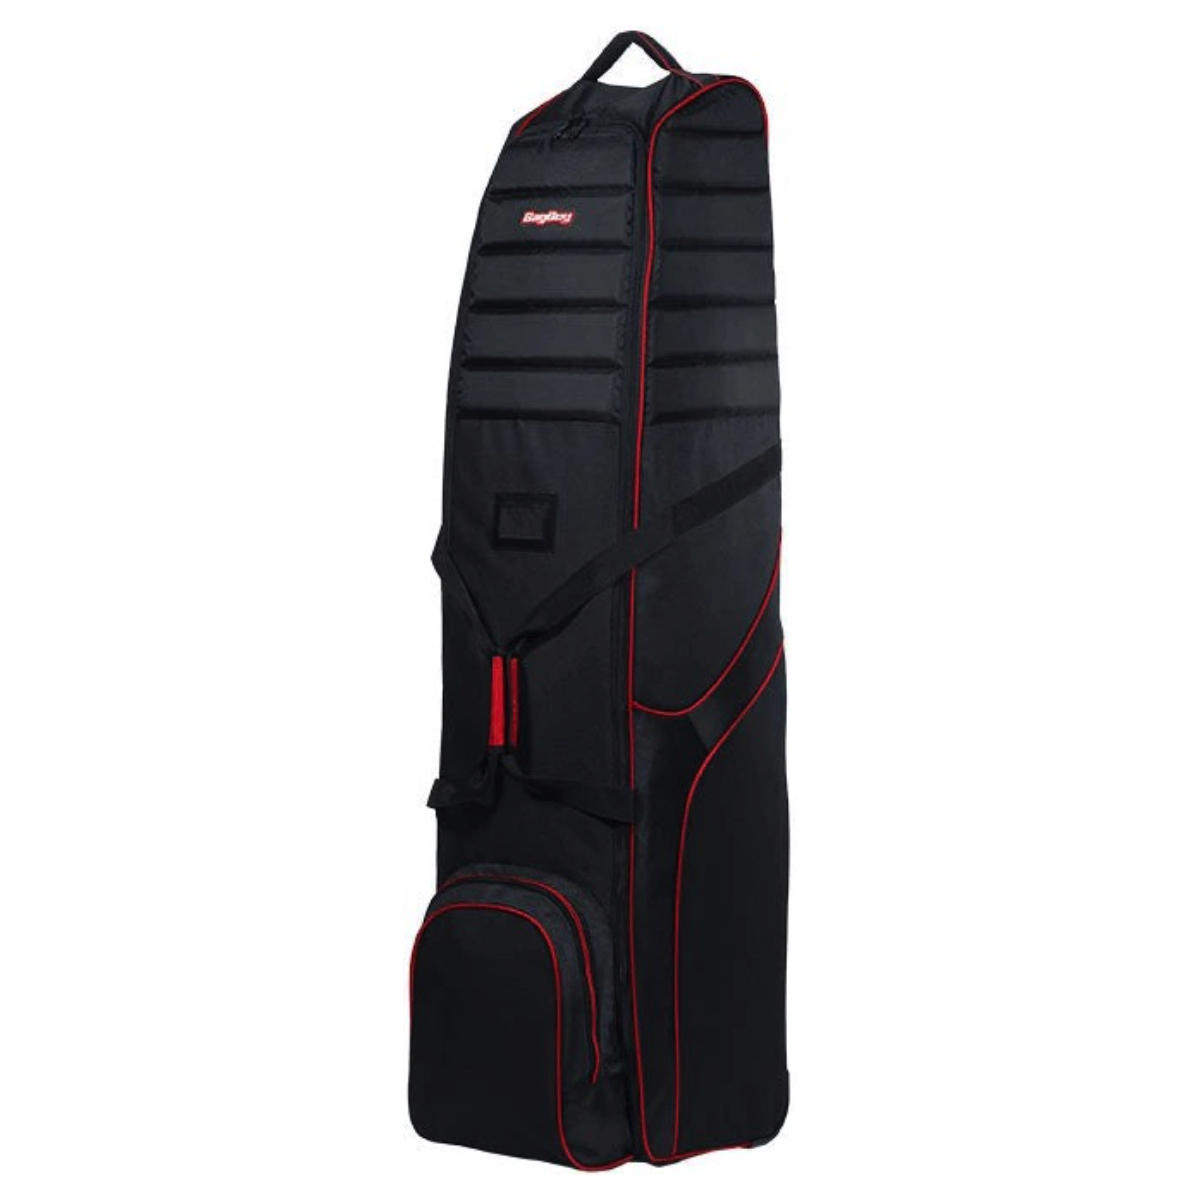 Bag Boy T660 Black/Red Travelcover